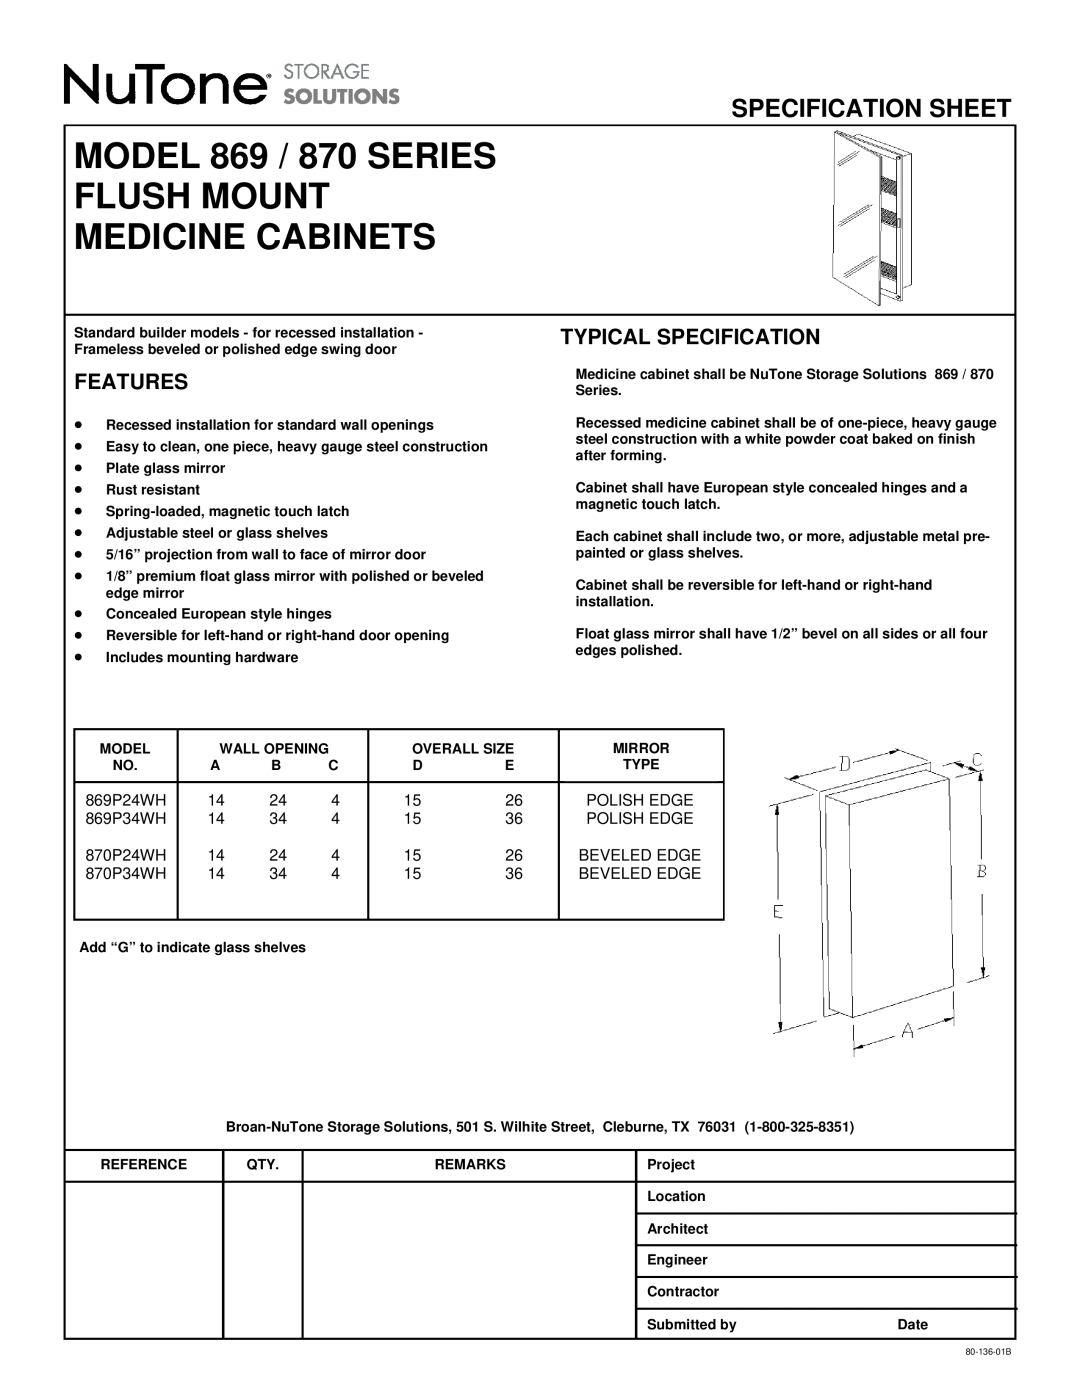 NuTone specifications MODEL 869 / 870 SERIES FLUSH MOUNT, Medicine Cabinets, Specification Sheet, Features 